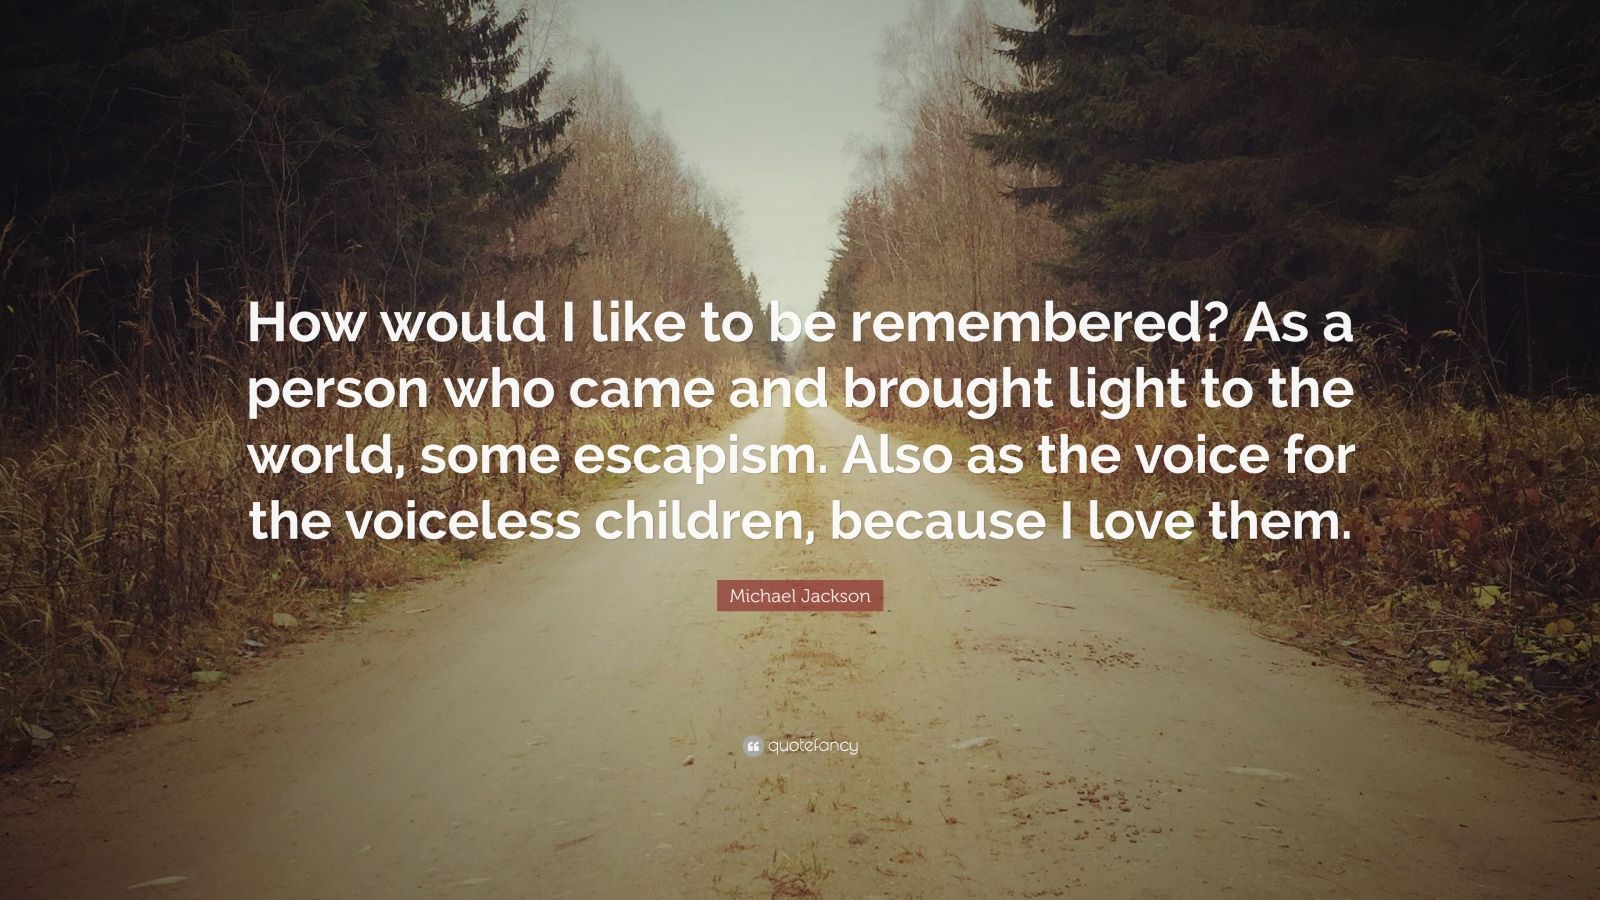 Michael Jackson Quote: “How would I like to be remembered? As a person who came and brought light to the world, some escapism. Also as the voice...”